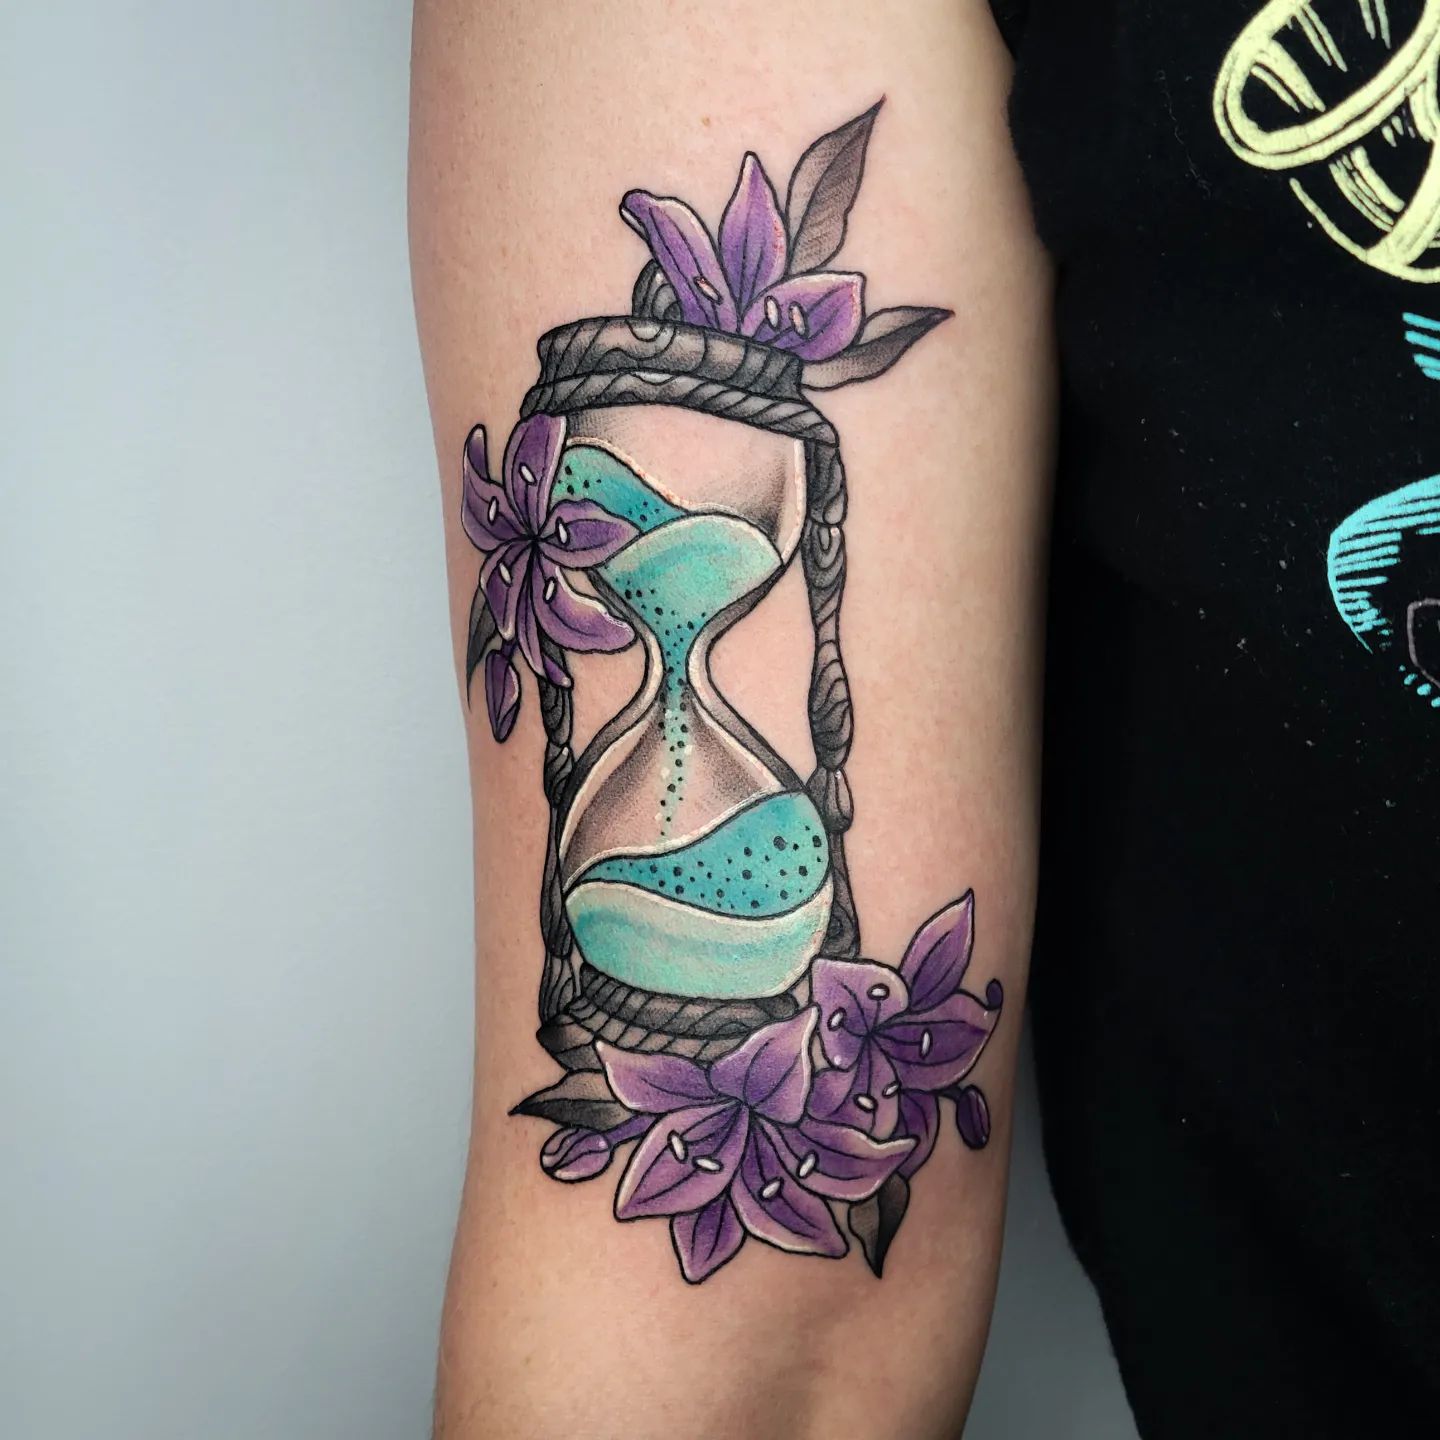 Sandglass and purple lilies tattoo is a symbol of the meaning of life, nature, and eternity. It is said that the sandglass represents the passage of time and how we should not waste it but rather make the most out of it. The lilies are a symbol of purity and light, so they are meant to represent the hope that we will be able to attain purity in our lives.